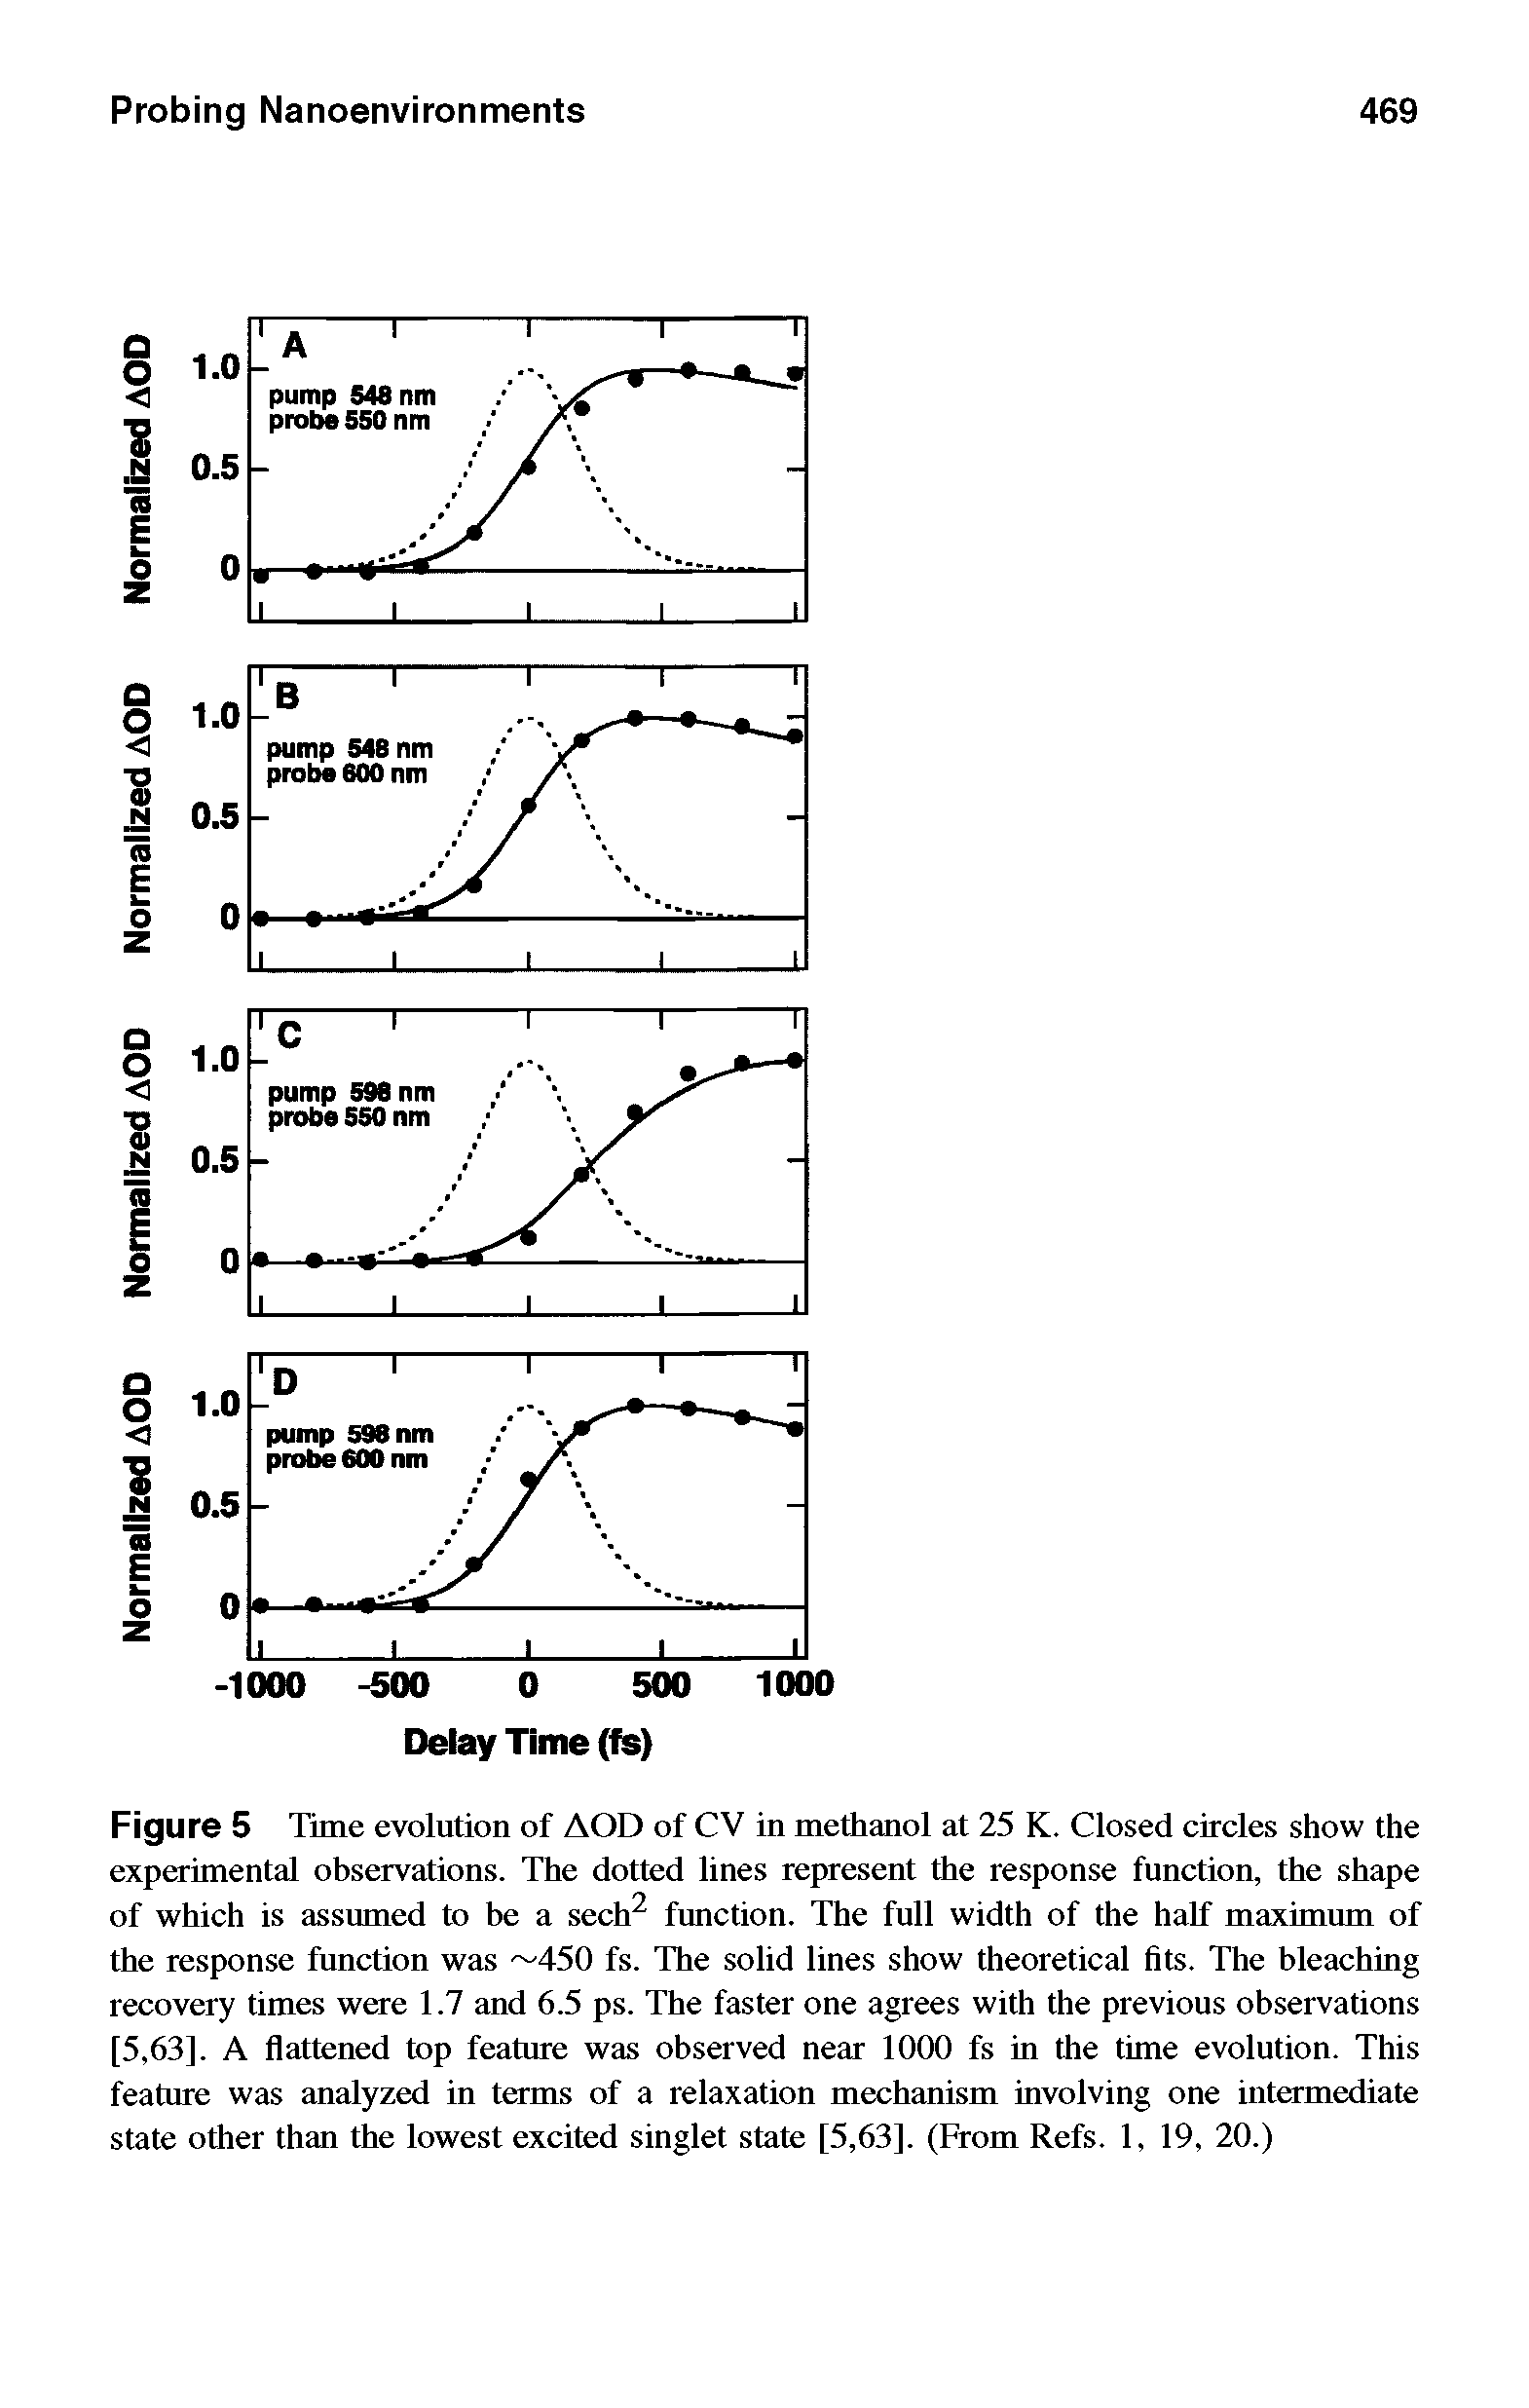 Figure 5 Time evolution of AOD of CV in methanol at 25 K. Closed circles show the experimental observations. The dotted lines represent the response function, the shape of which is assumed to be a sech2 function. The full width of the half maximum of the response function was 450 fs. The solid lines show theoretical fits. The bleaching recovery times were 1.7 and 6.5 ps. The faster one agrees with the previous observations [5,63]. A flattened top feature was observed near 1000 fs in the time evolution. This feature was analyzed in terms of a relaxation mechanism involving one intermediate state other than the lowest excited singlet state [5,63]. (From Refs. 1, 19, 20.)...